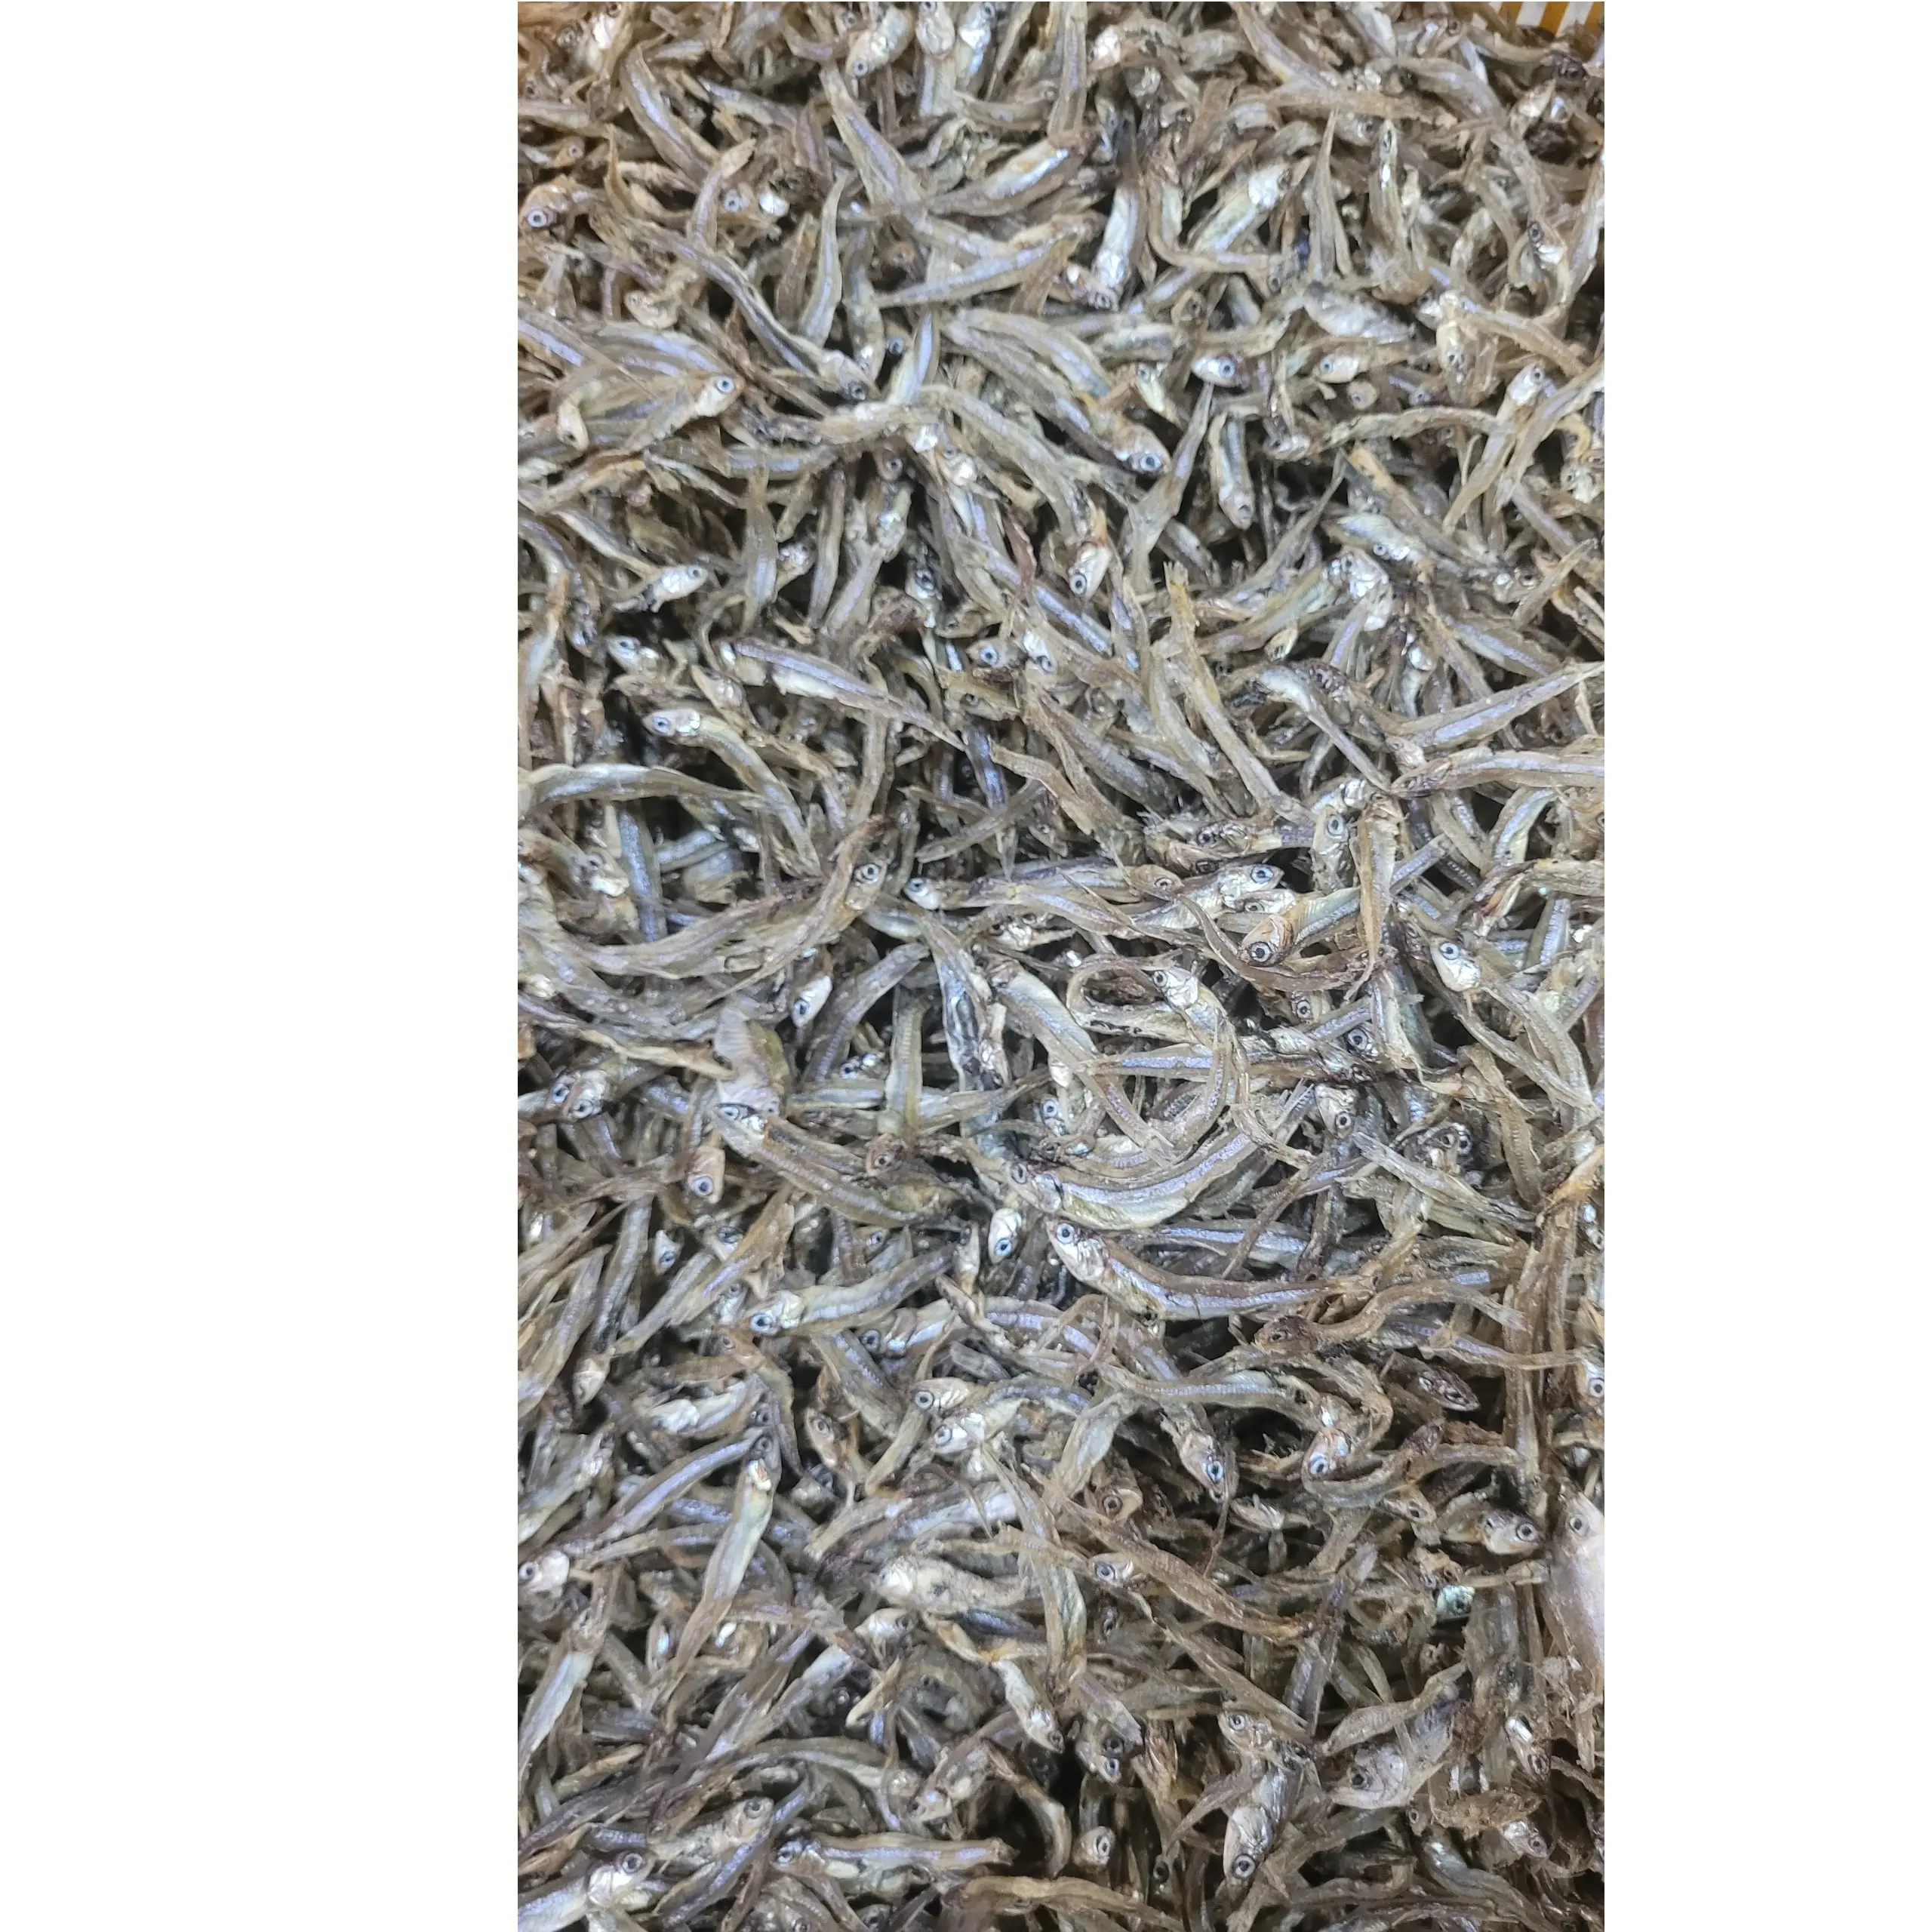 Vietnam Small Size Fresh Natural Color Grey Dried Anchovy Without Steam 4-6cm Whole Small Fish Anchovy Head Seafood